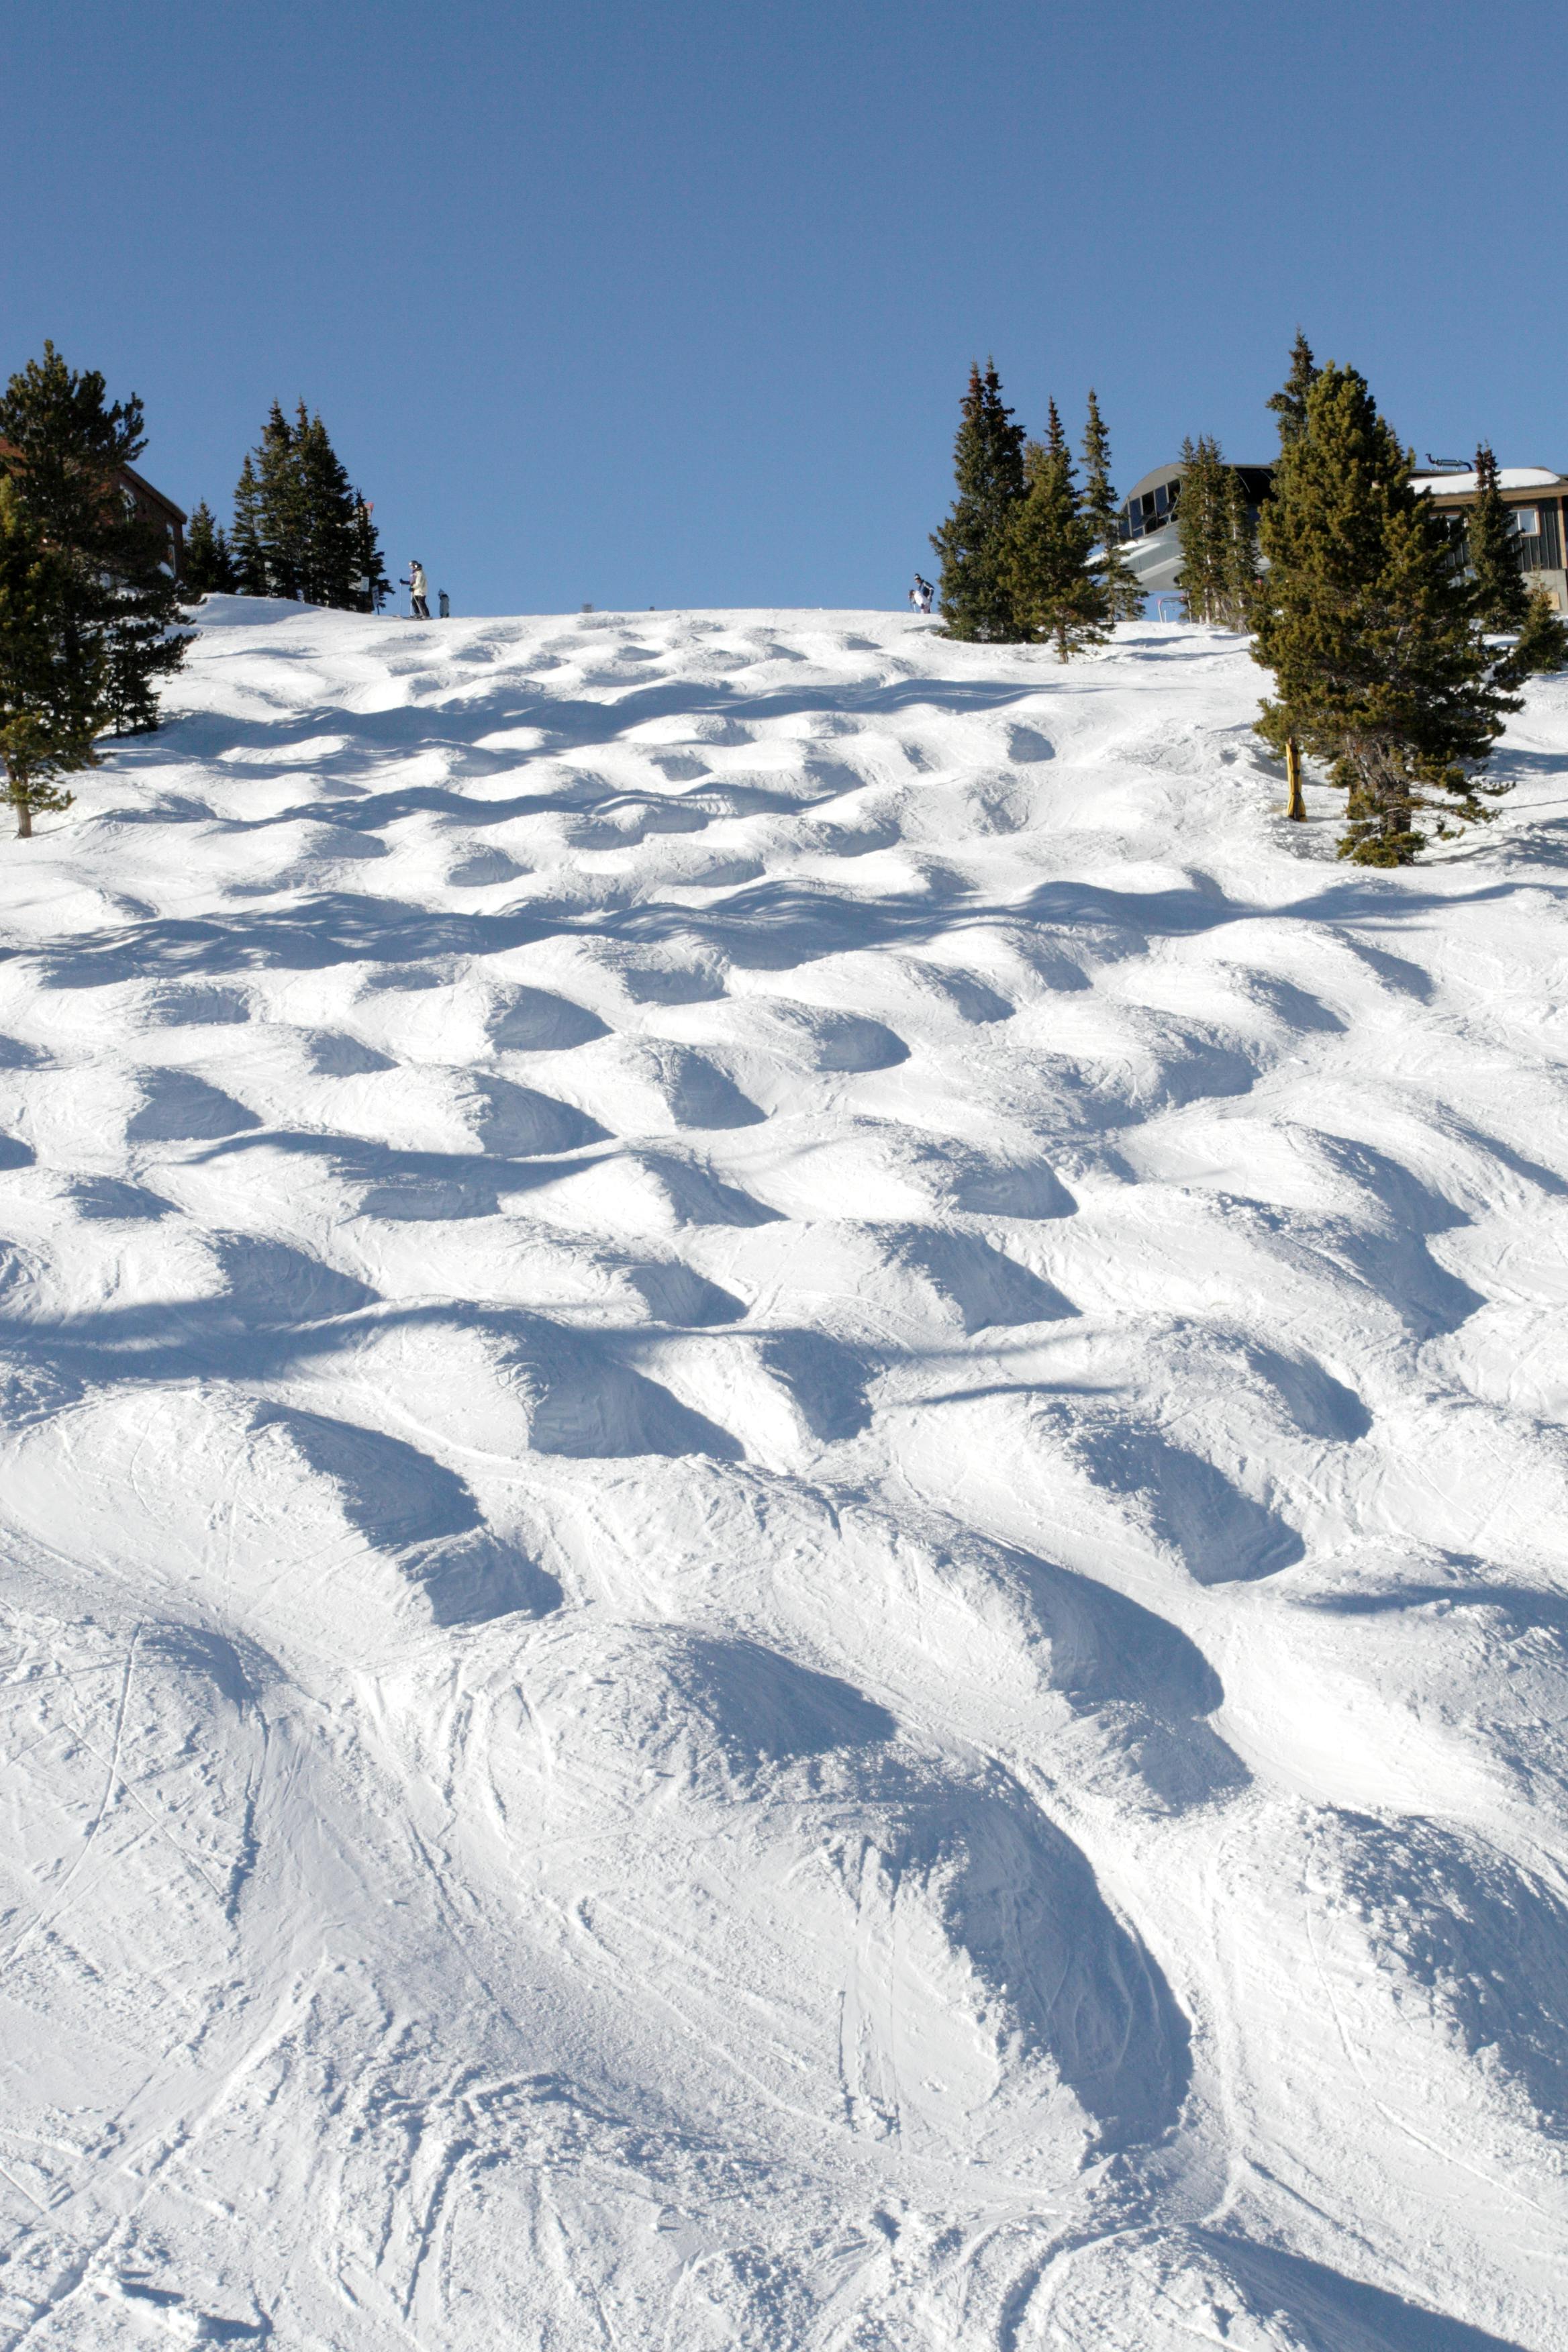 A mogul field as seen from the bottom of the slope